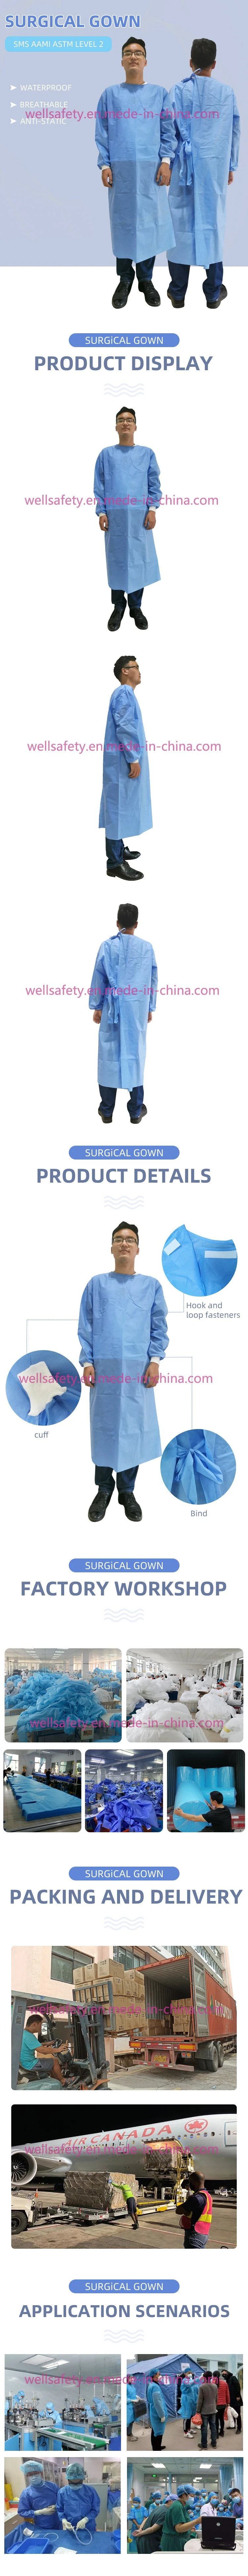 Cheap Price Disposable Waterproof SMS SMMS Nonwoven Level 4 Waterproof Surgeon Gown Reinforced ANSI/AAMI Sterile Surgical Isolation Gown FDA, CE, En14126